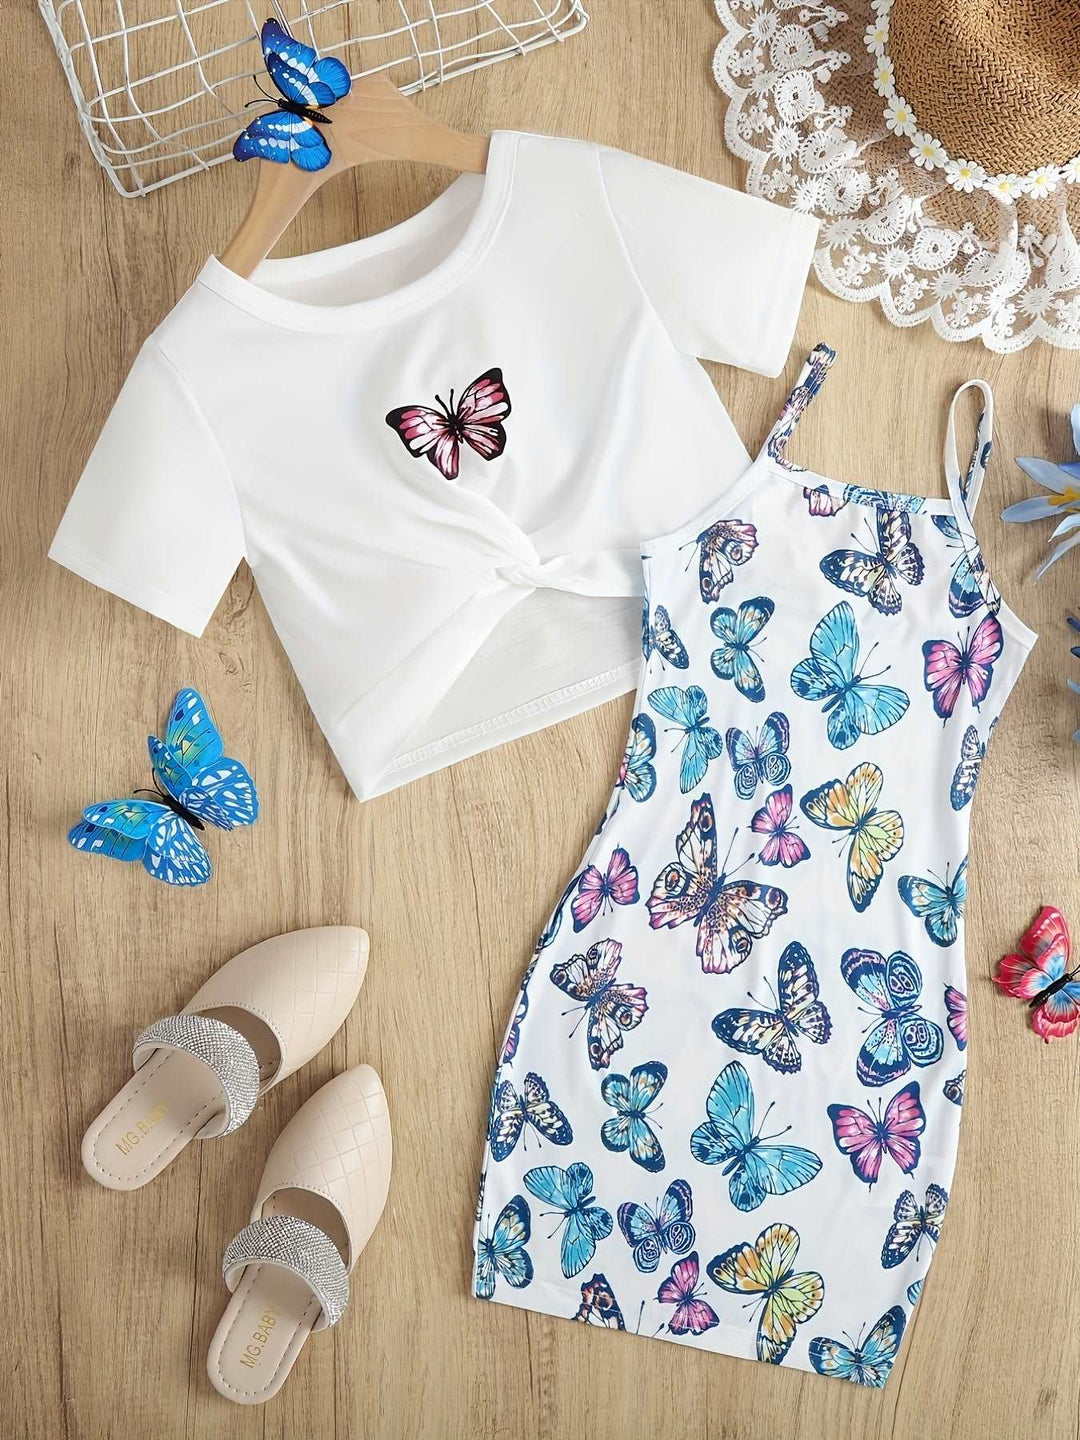 Adorable Girls Butterfly Graphic Tee and Cami Dress Sets - Gen U Us Products